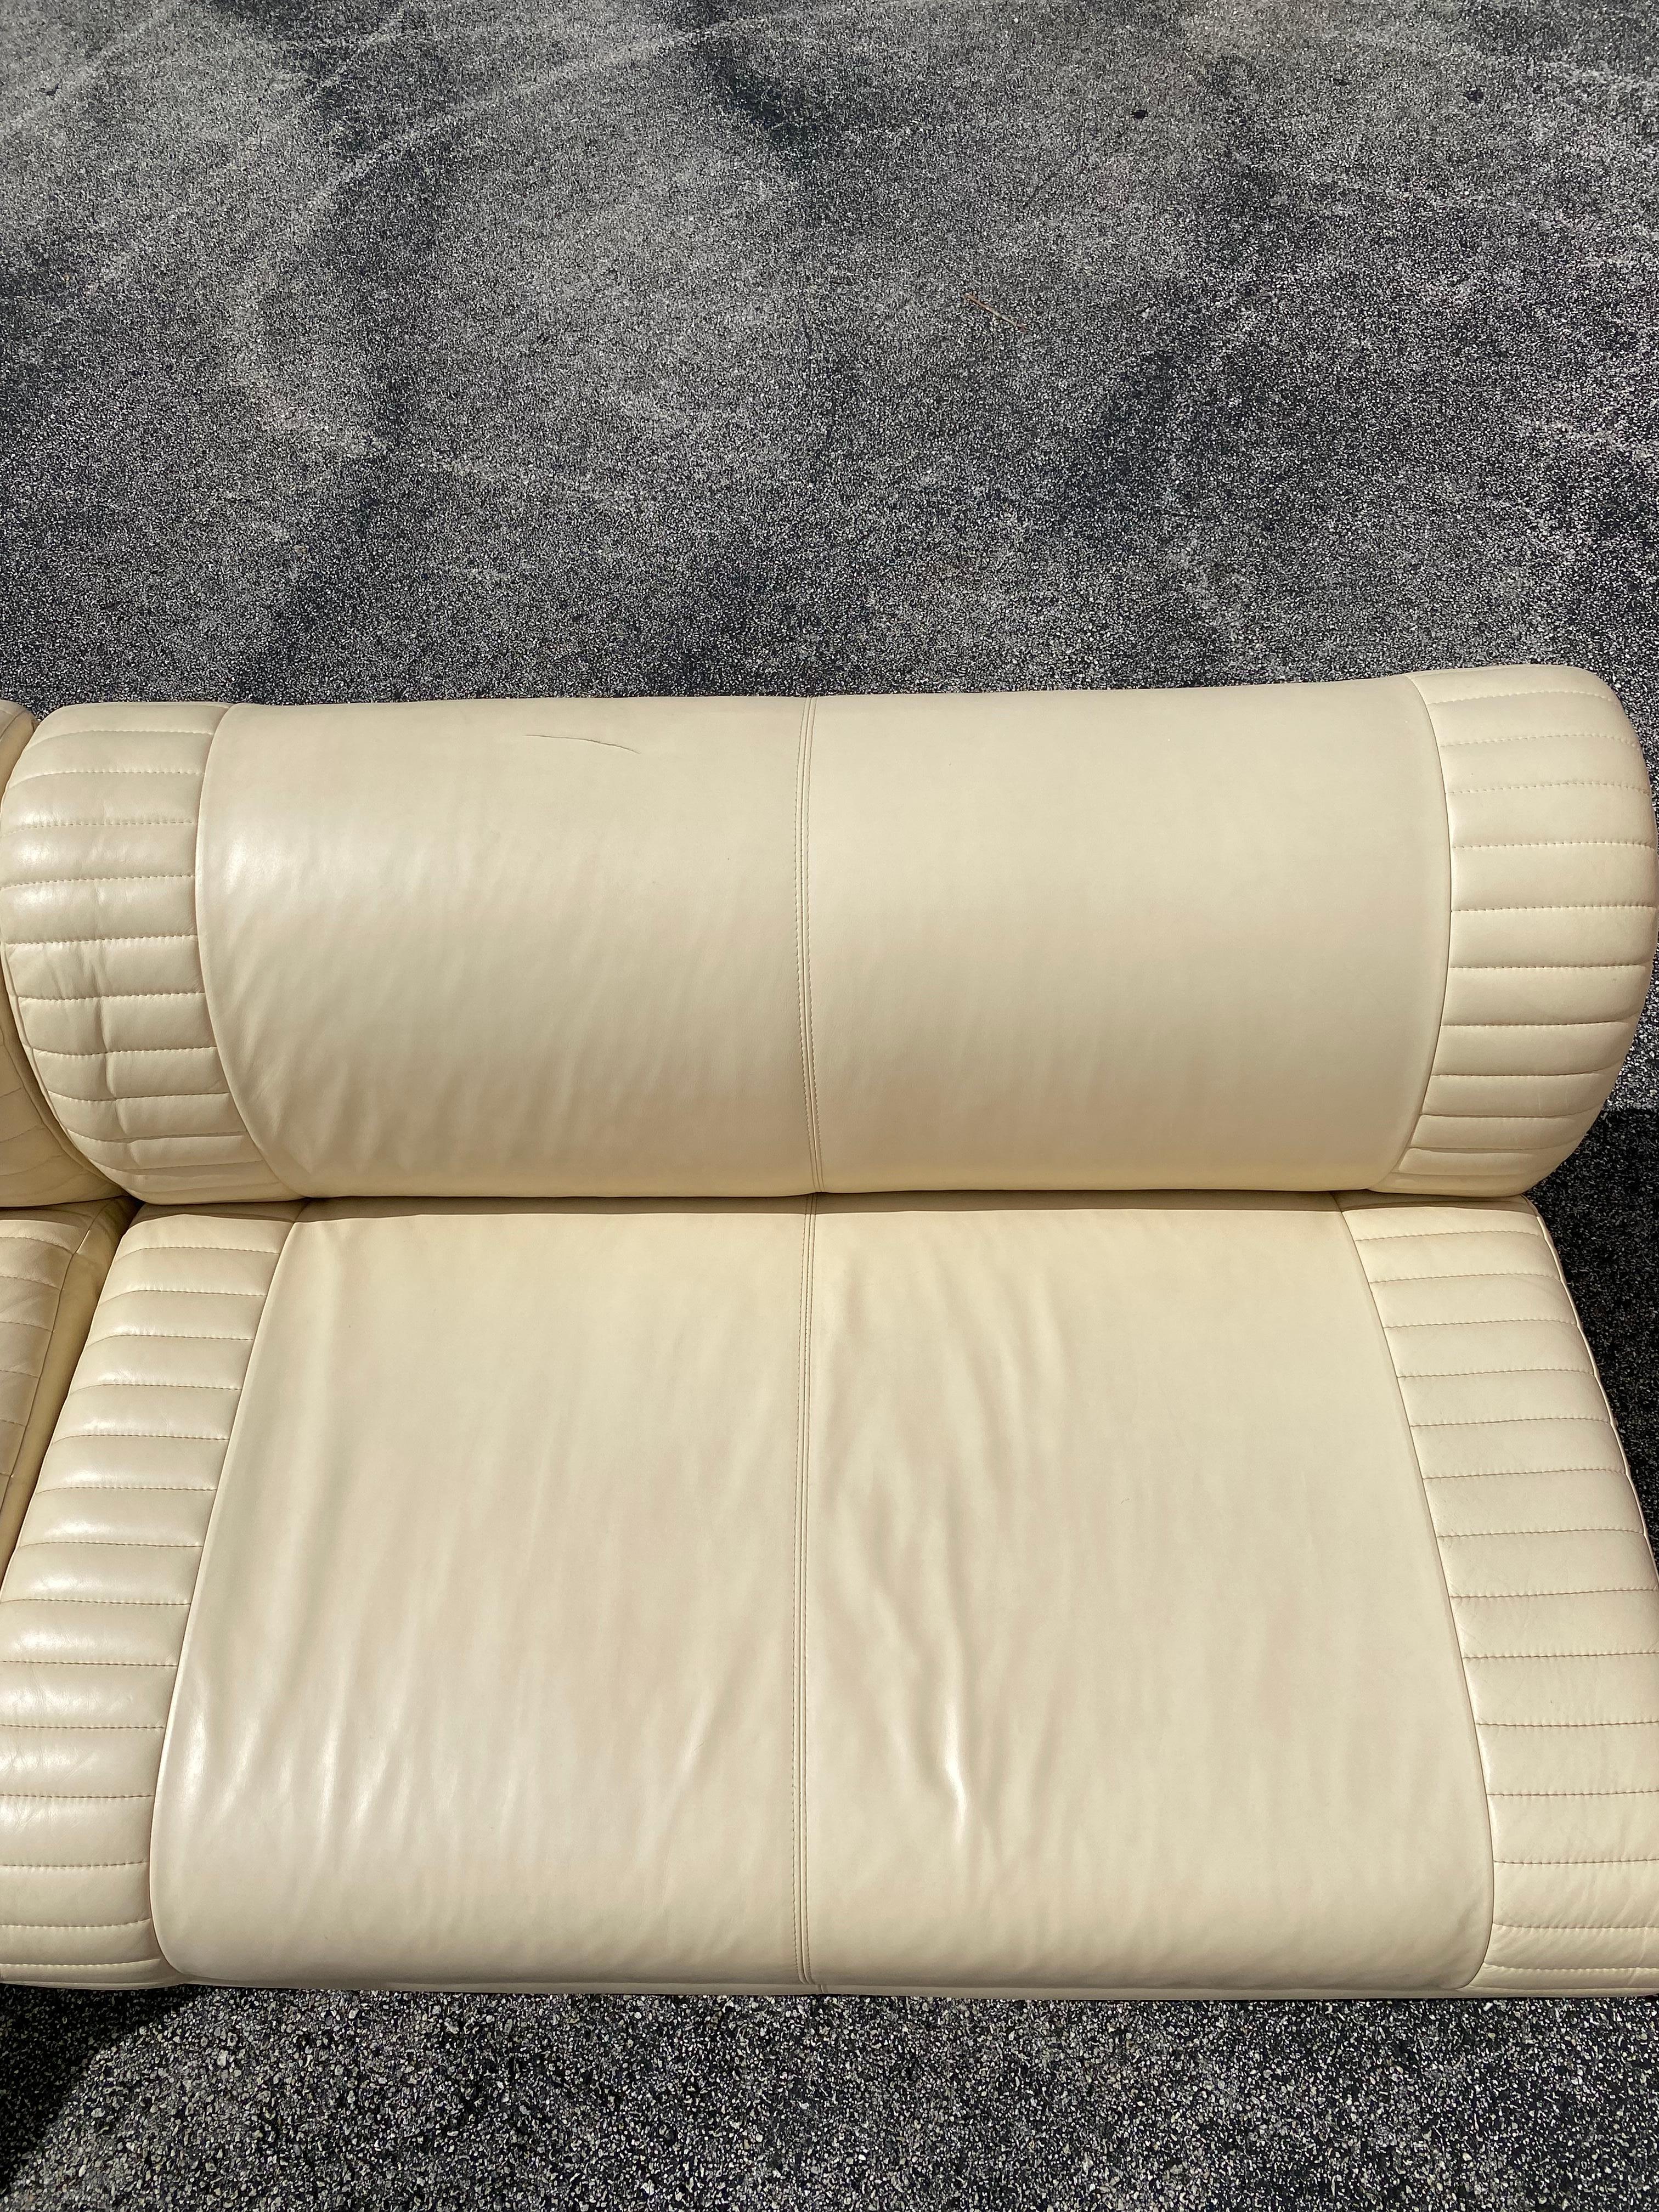 1980s Weiman Serpentine Modular Beige Leather Sectional For Sale 11